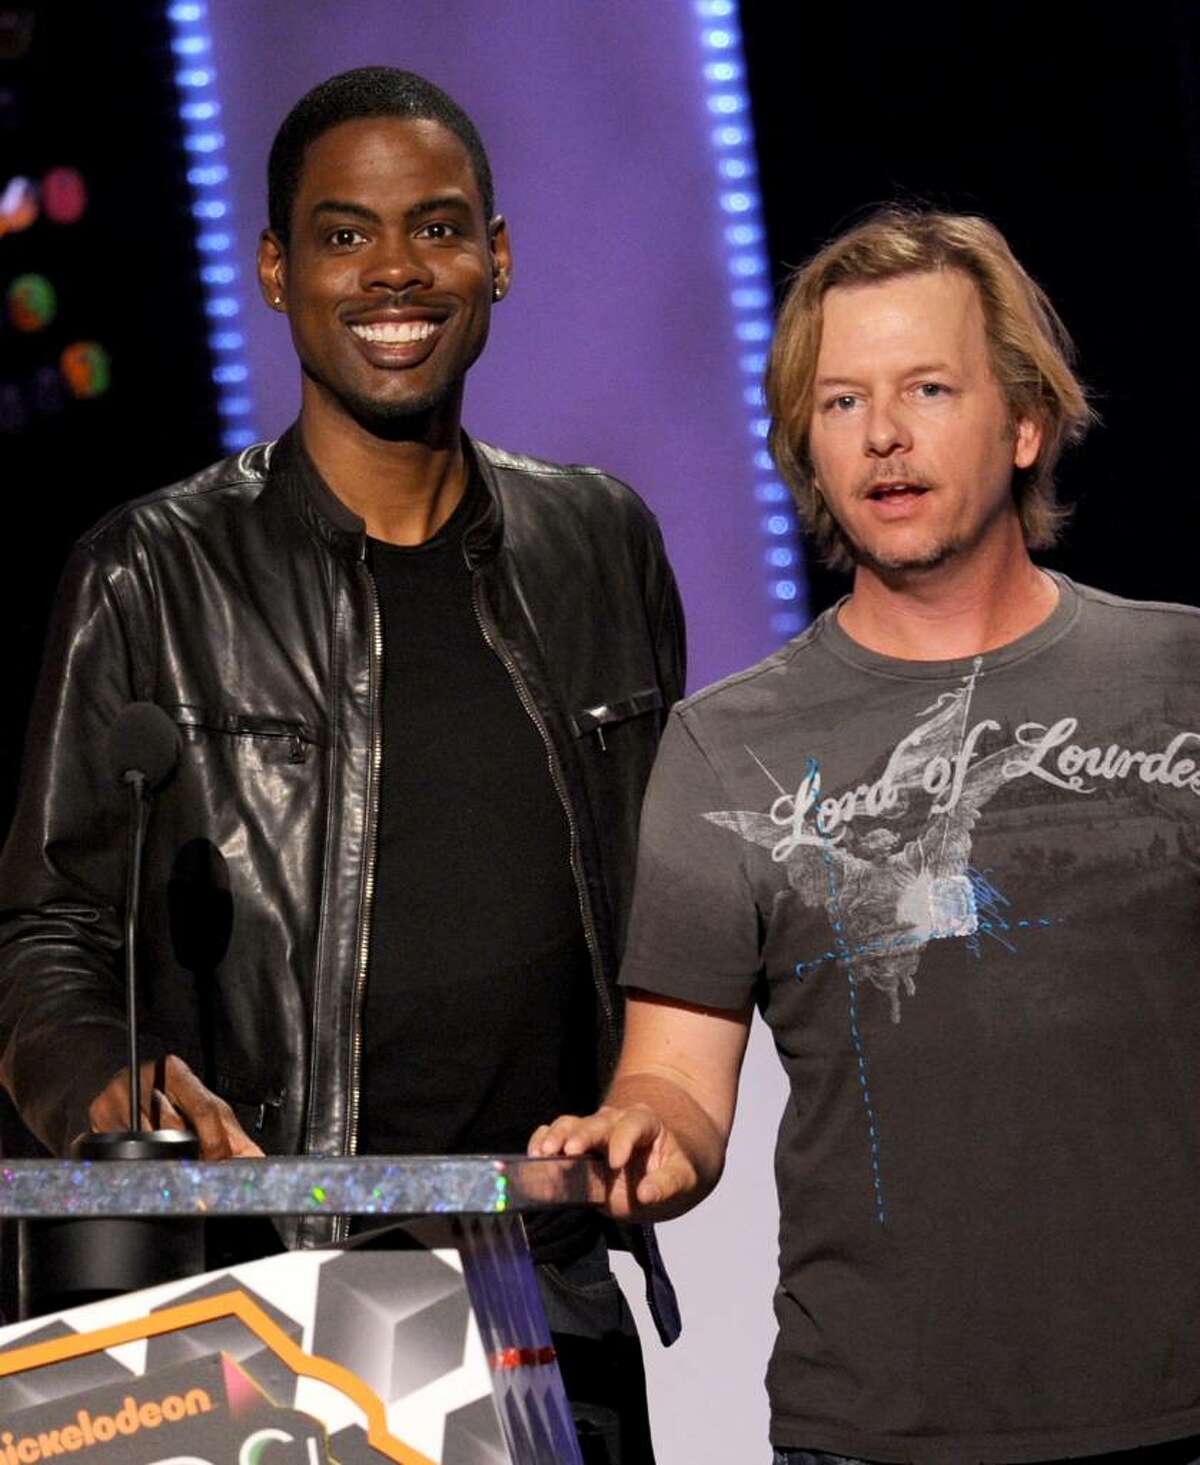 LOS ANGELES, CA - MARCH 27: Actor/comedians Chris Rock (L) and David Spade speak onstage at Nickelodeon's 23rd Annual Kids' Choice Awards held at UCLA's Pauley Pavilion on March 27, 2010 in Los Angeles, California. (Photo by Kevin Winter/Getty Images for KCA) *** Local Caption *** Chris Rock;David Spade